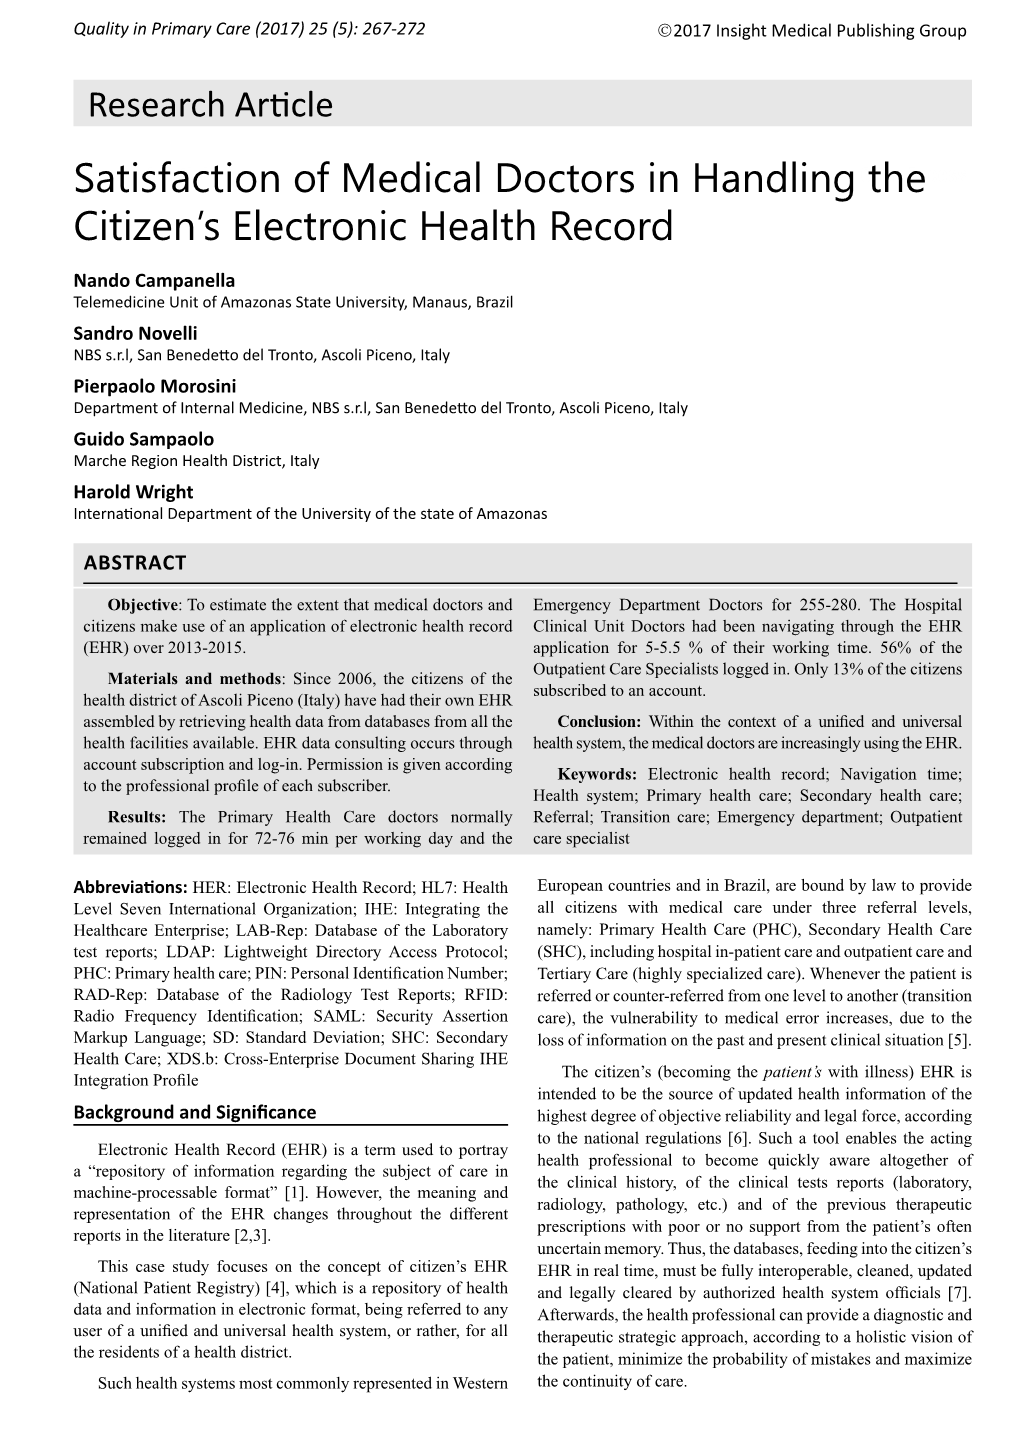 Satisfaction of Medical Doctors in Handling the Citizen's Electronic Health Record